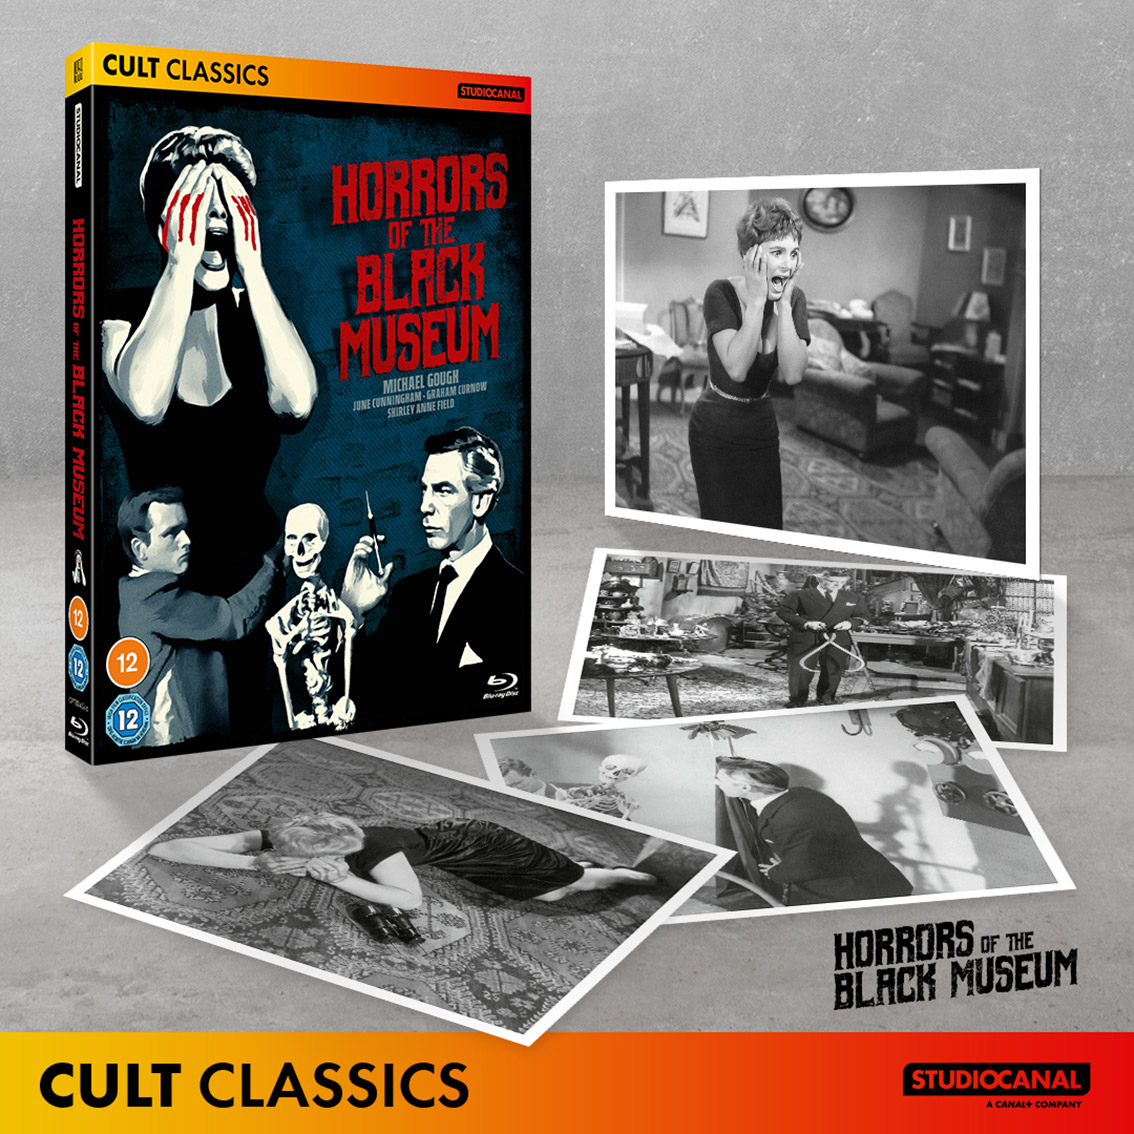 Horrors of the Black Museum Blu-ray pack shot